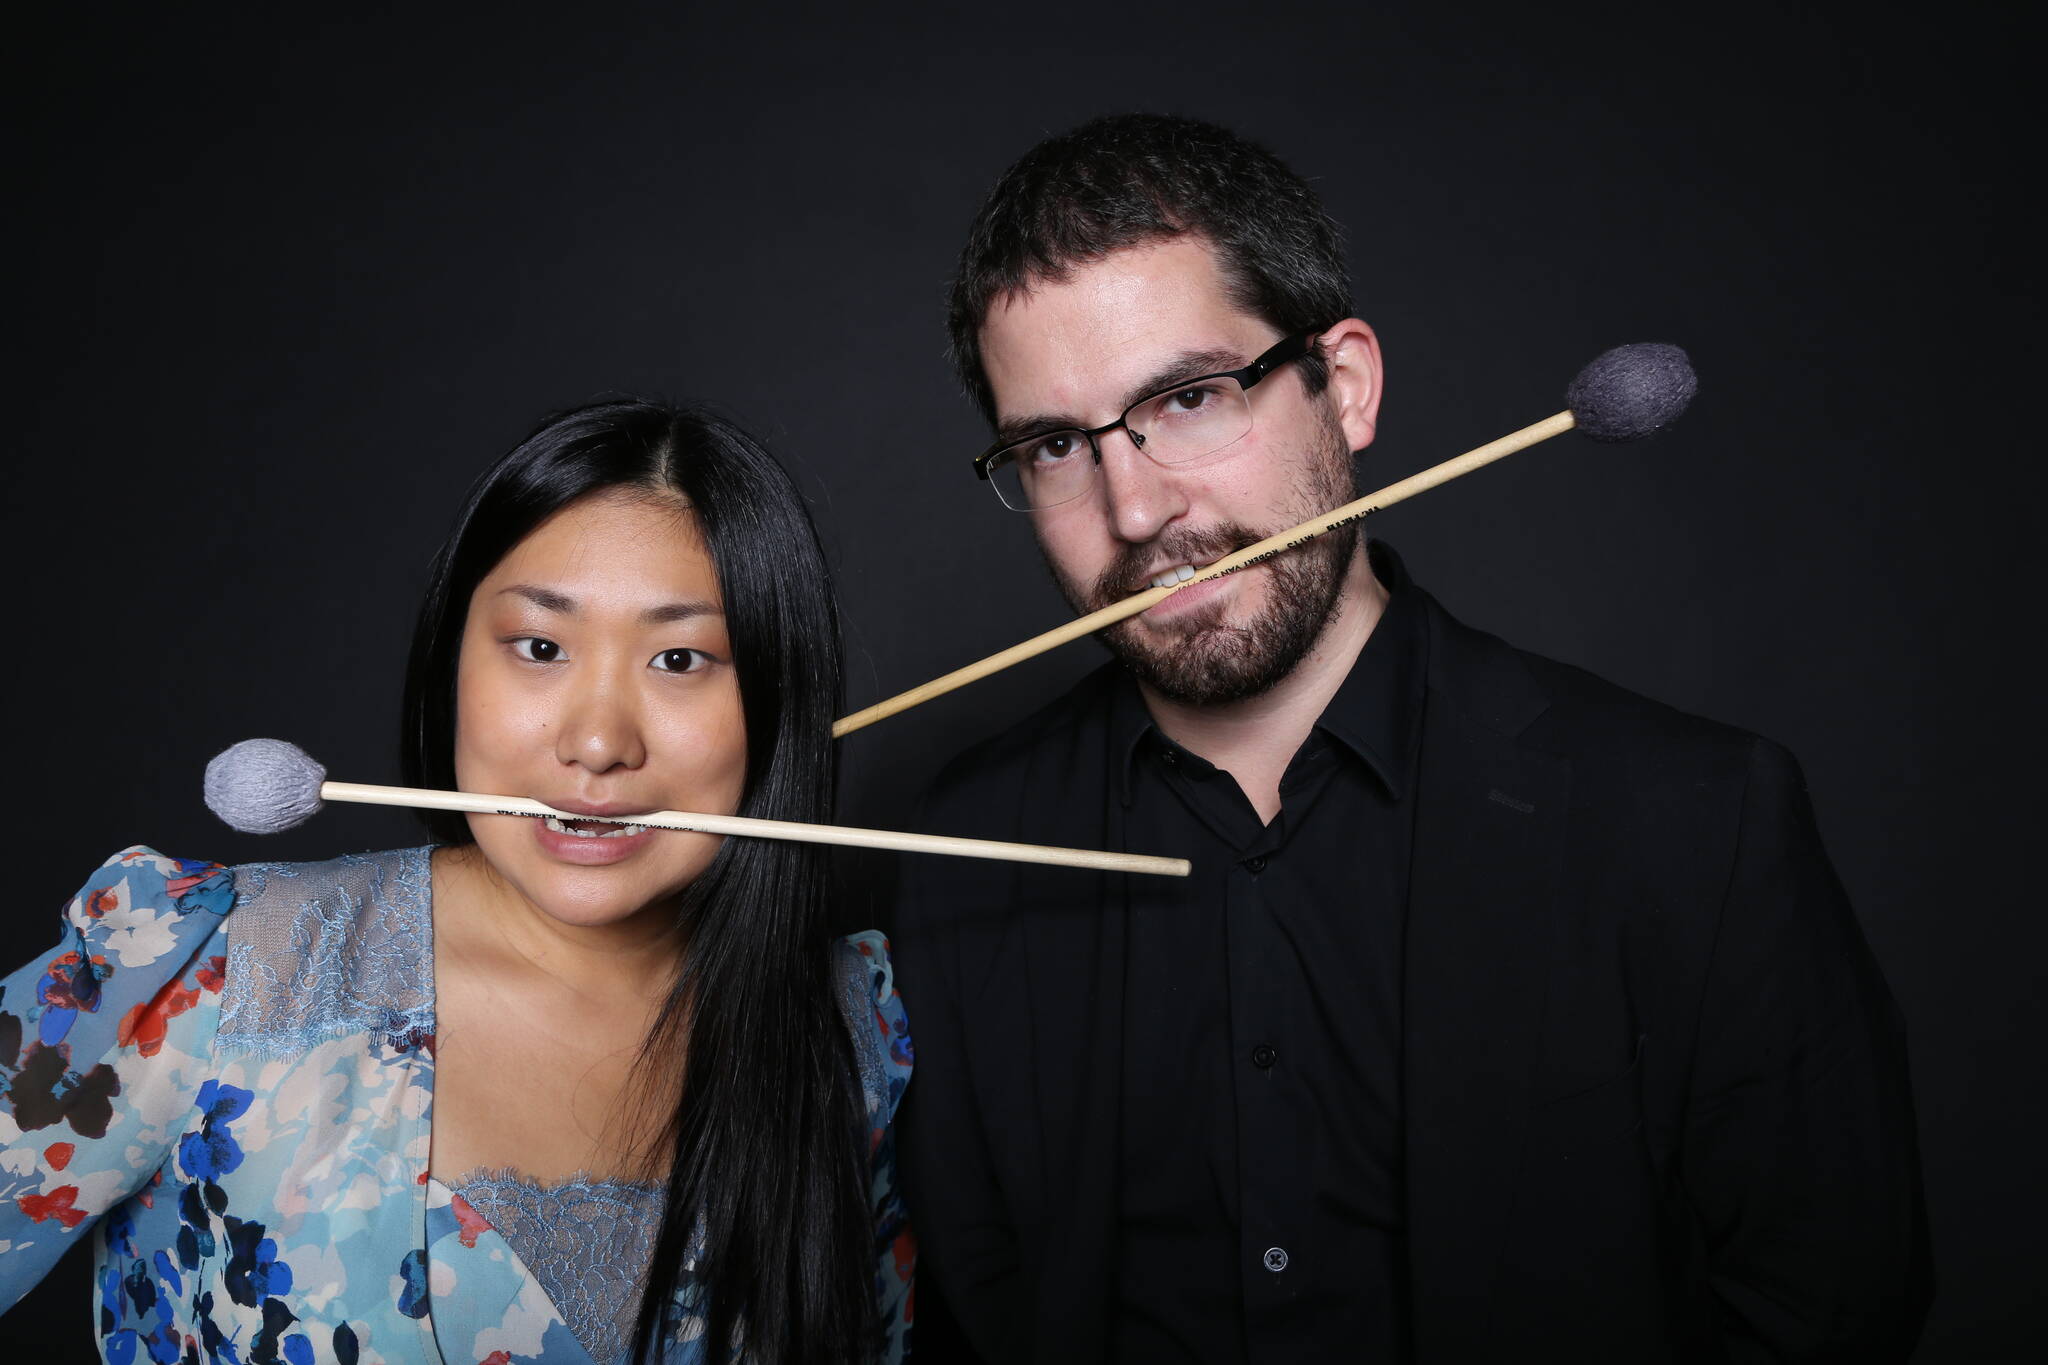 Photo courtesy of arx duo
Auburn Symphony’s second annual Harvest Happy Hour will include music by arx duo, which consists of percussionists Garrett Arney and Mari Yoshinaga.